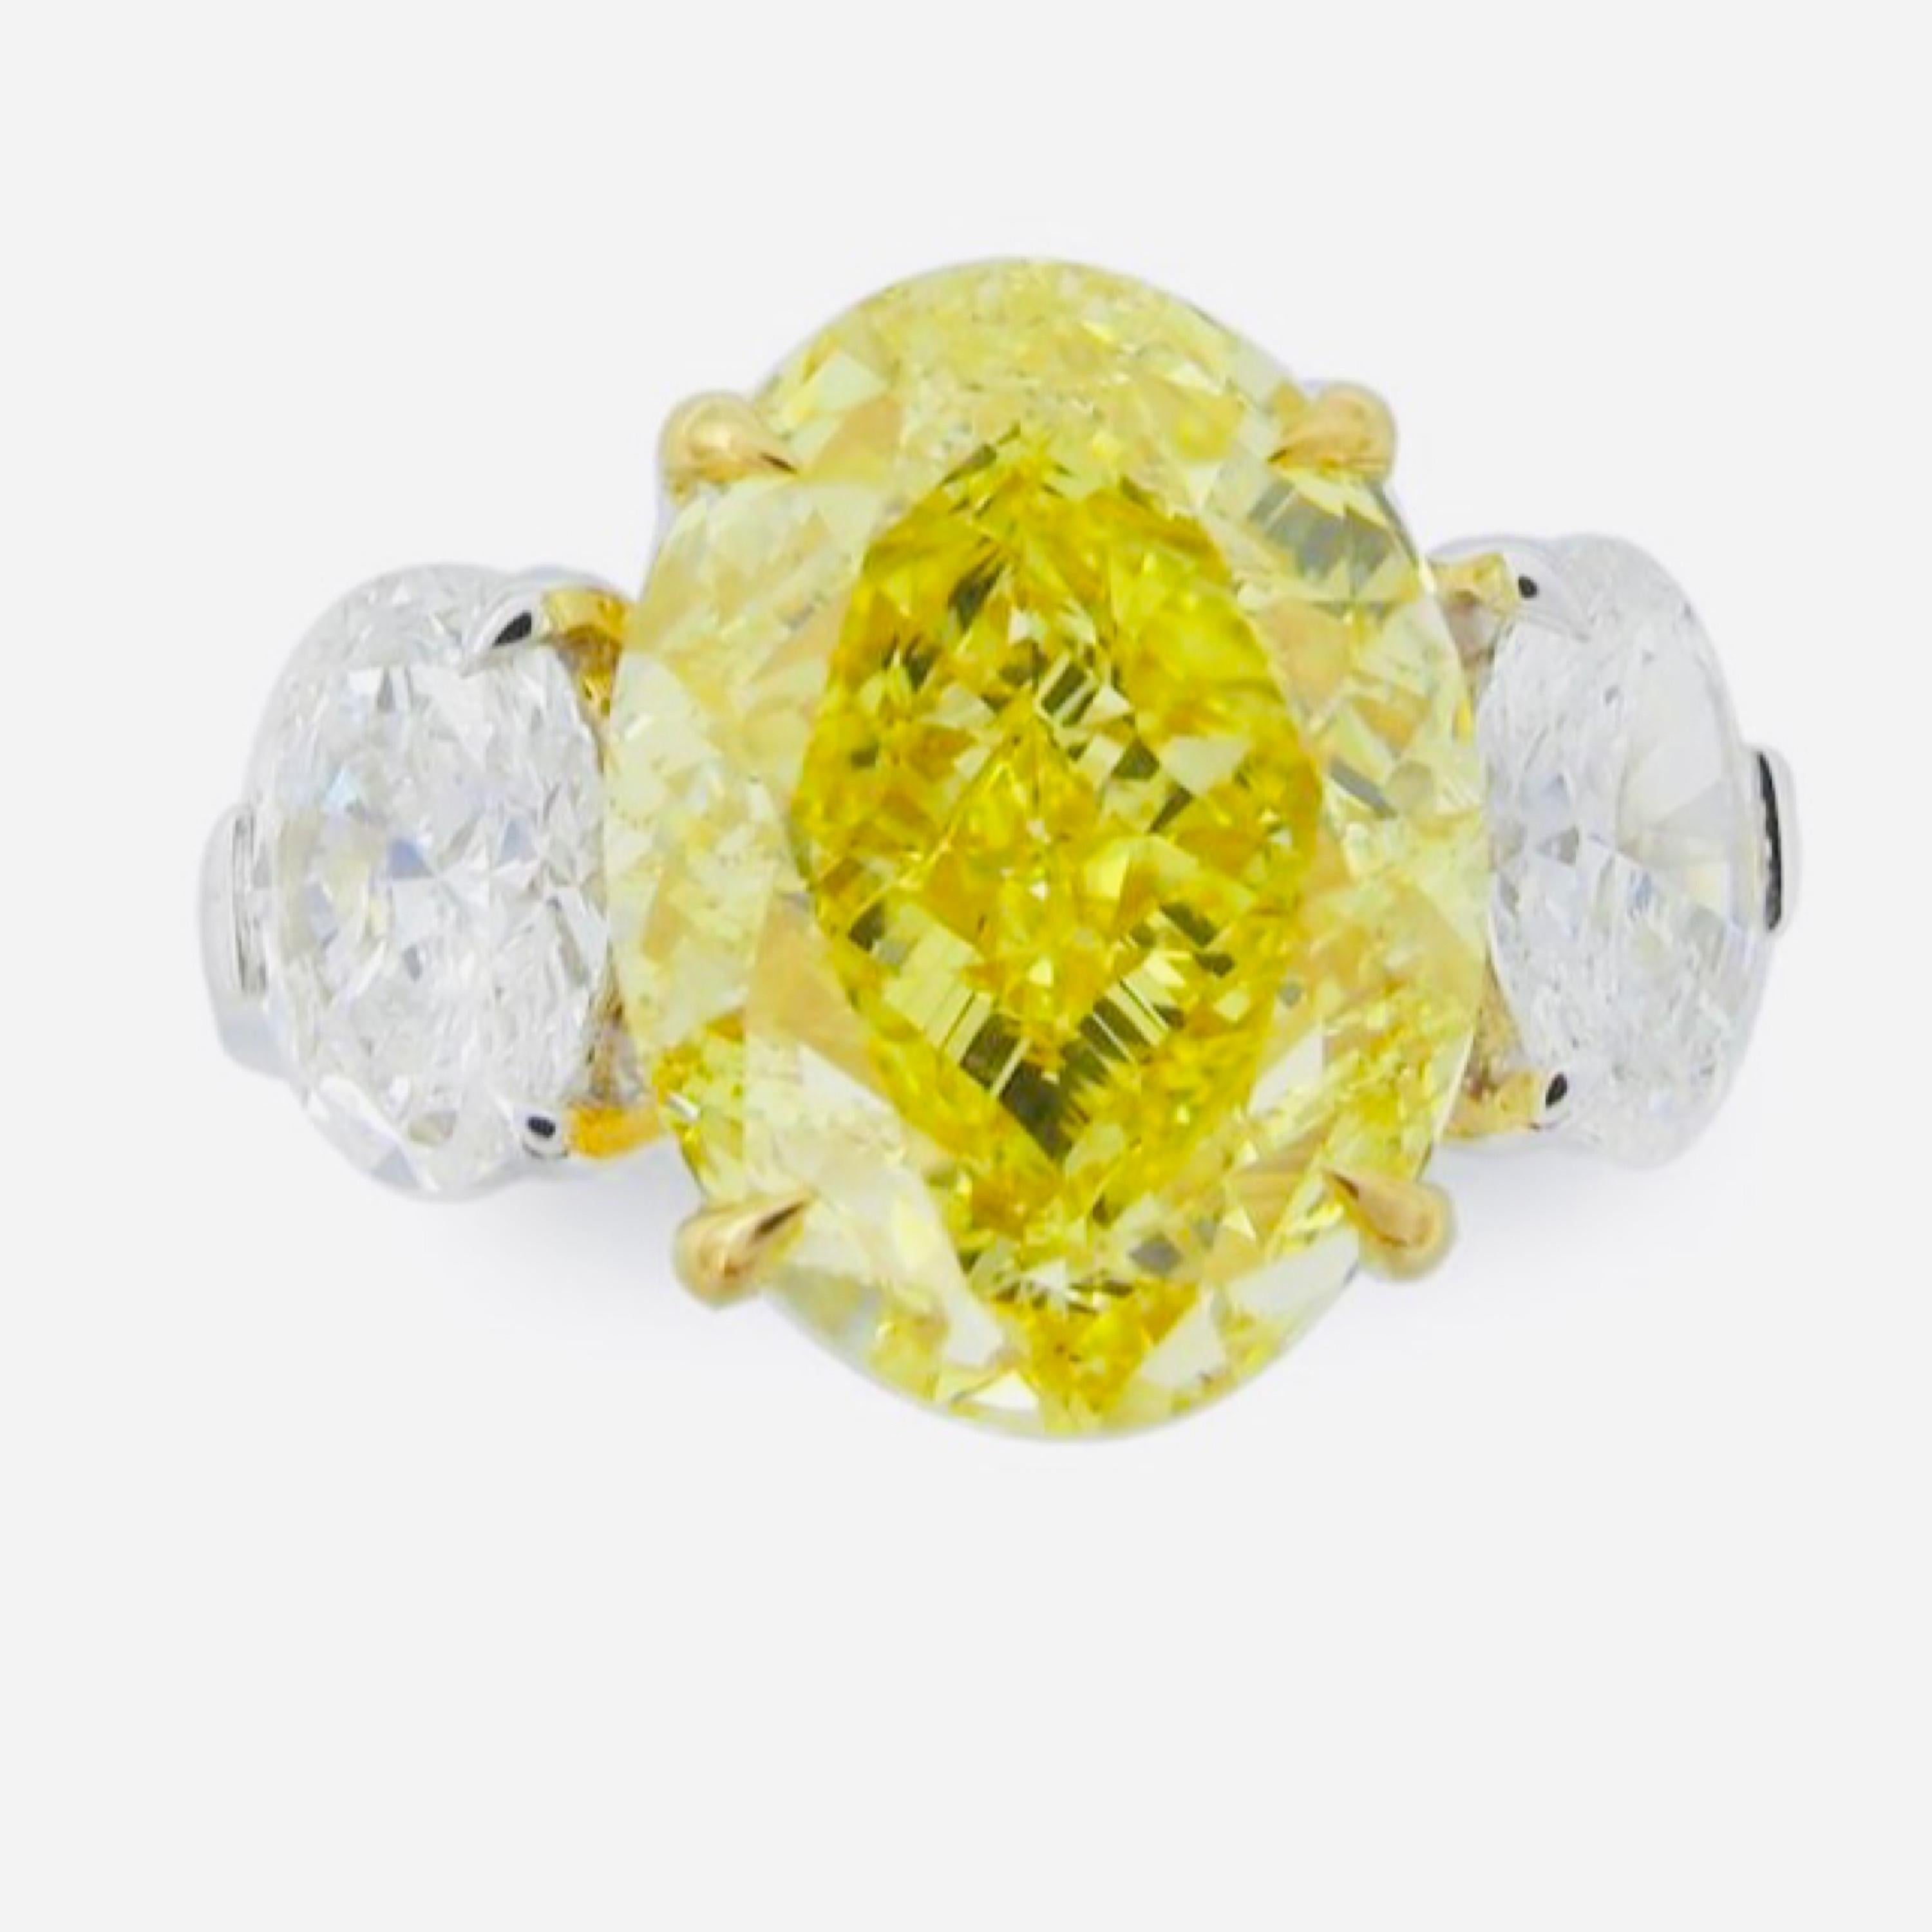 From The Museum Vault At Emilio Jewelry New York,
The most spectacular Vivid yellow diamond ring that exists! Filled with tremendous fire, sparkle and dance the center diamond is a dream for whoever will own it. The center is just over 6.50ct and